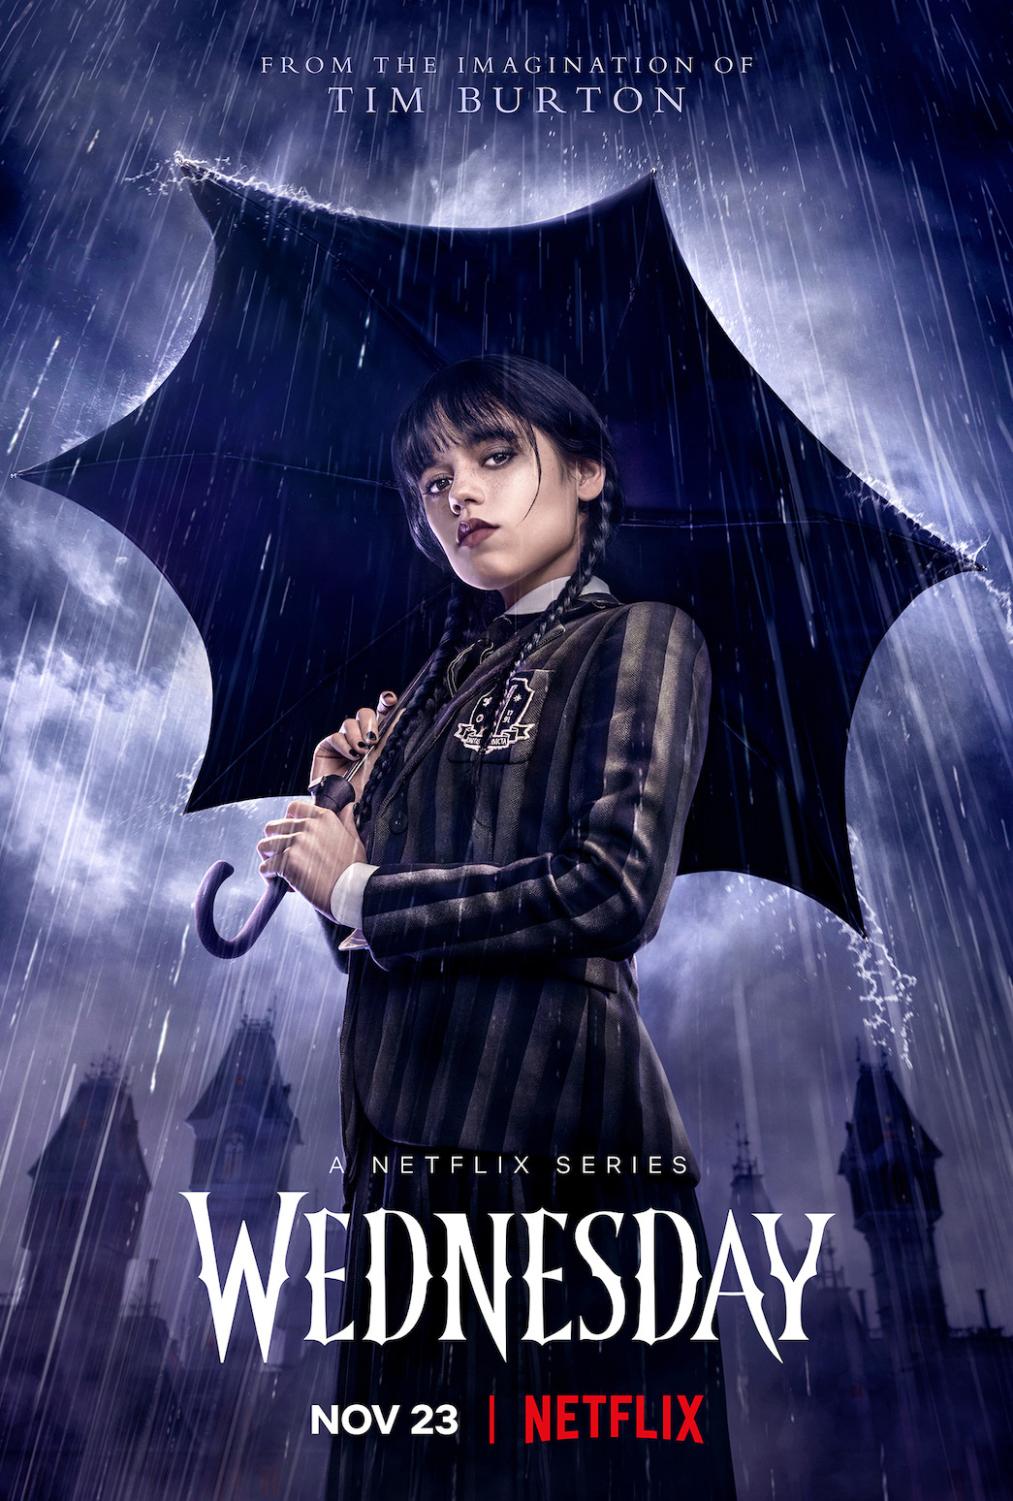 Wednesday Promotional Poster from Netflix